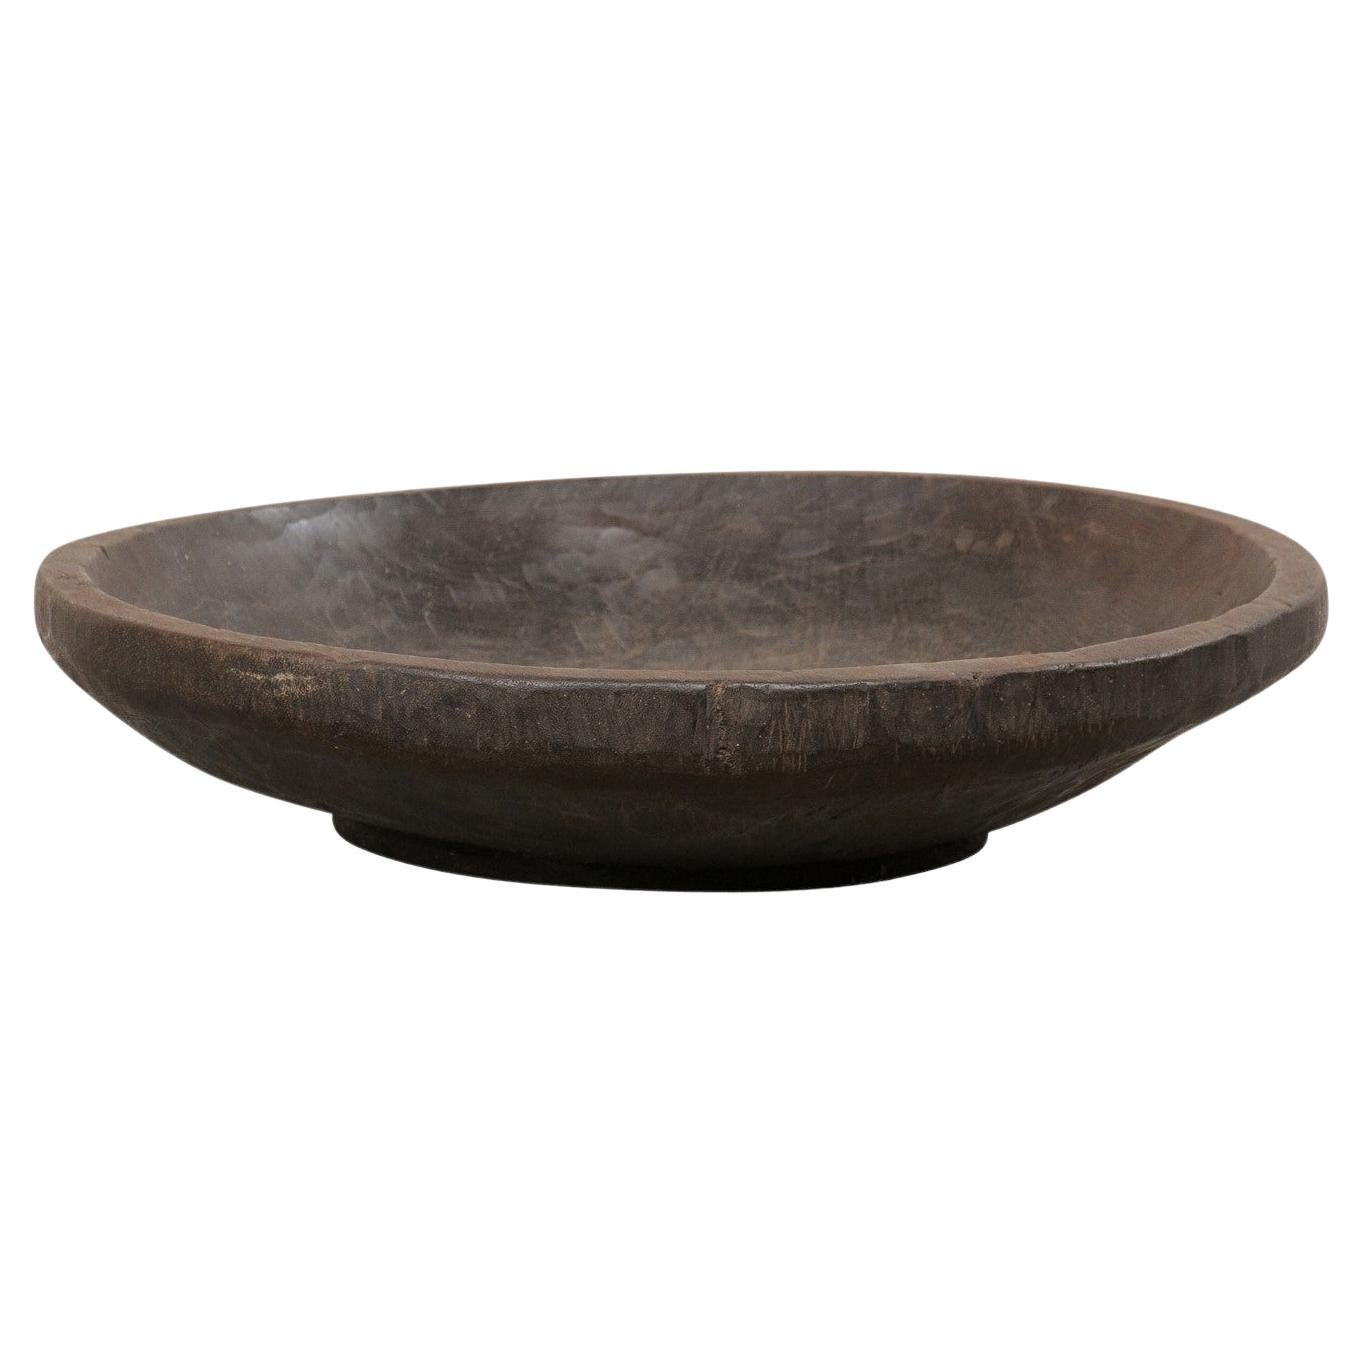 Sumatran Antique Tropical Hardwood Bowl Hand-Carved from a Single Piece of Wood For Sale